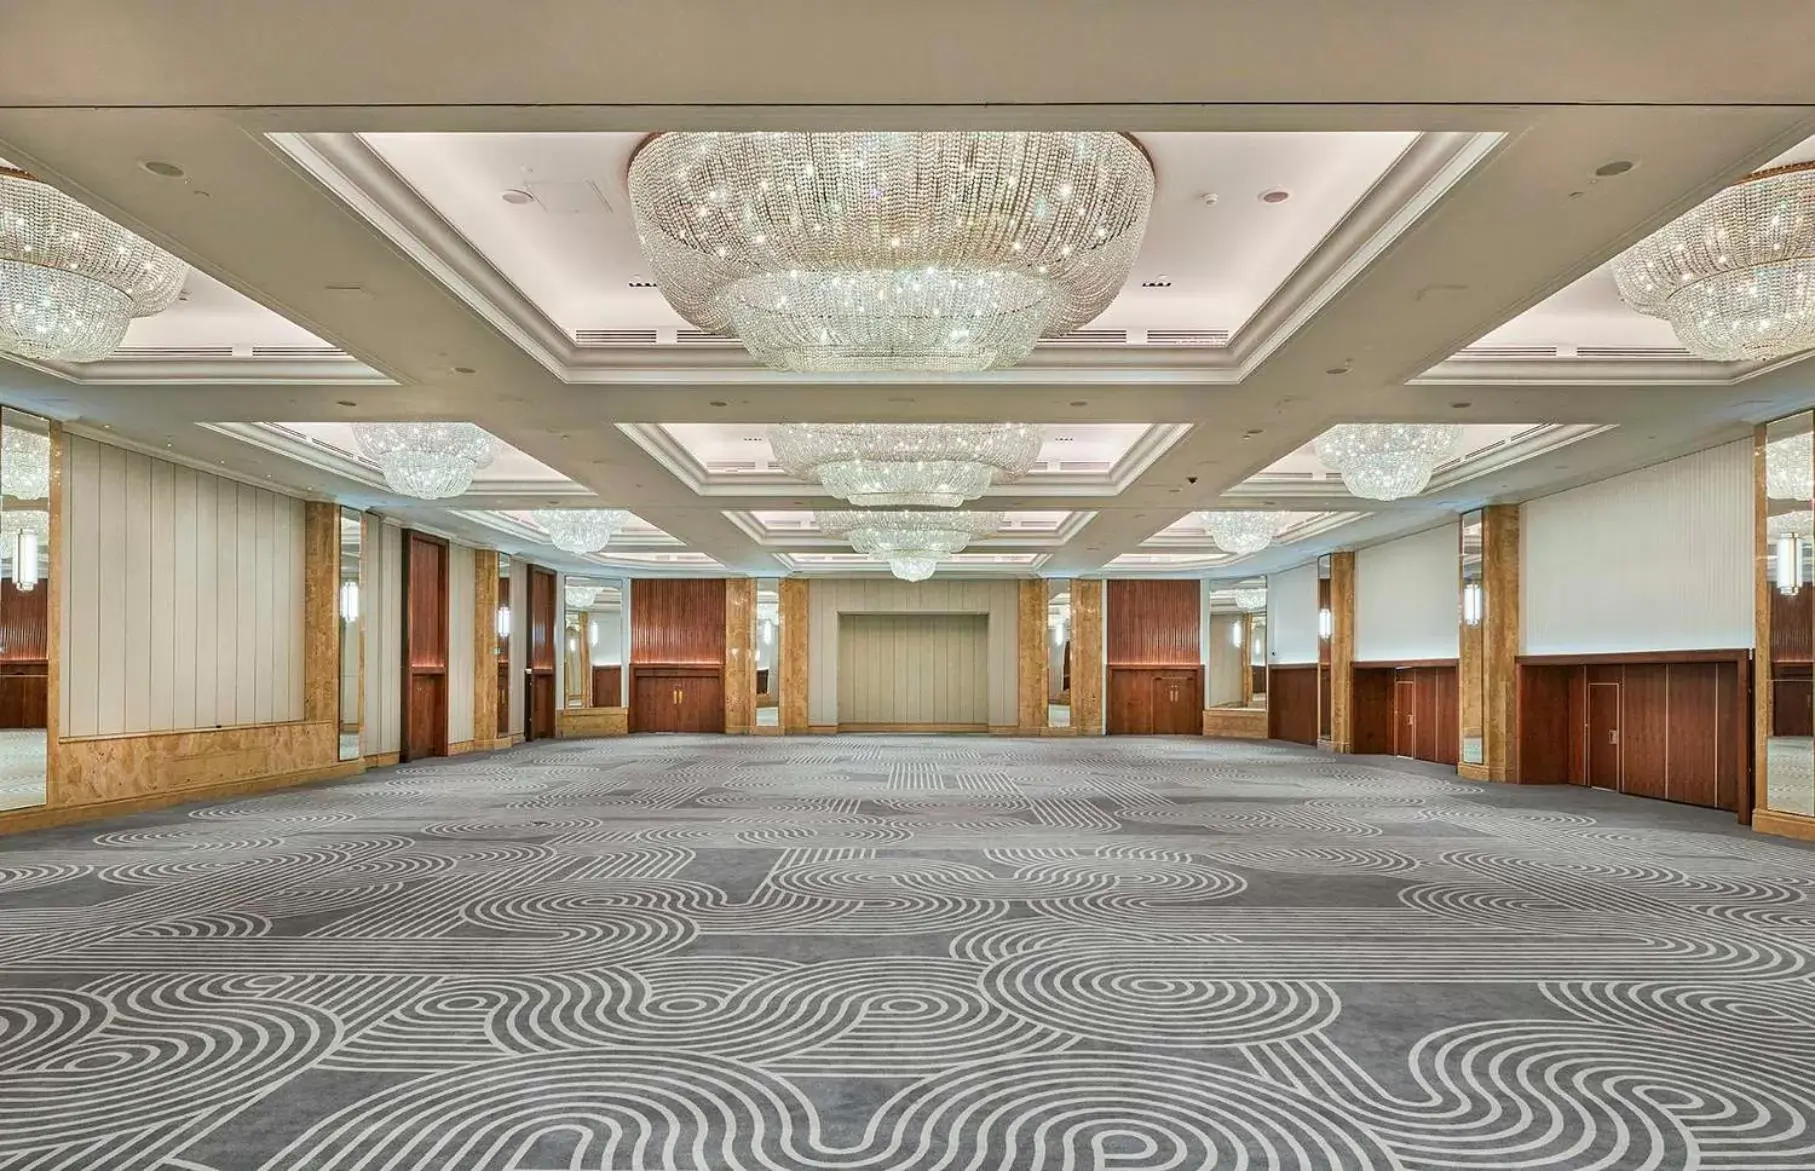 Meeting/conference room, Banquet Facilities in London Hilton on Park Lane